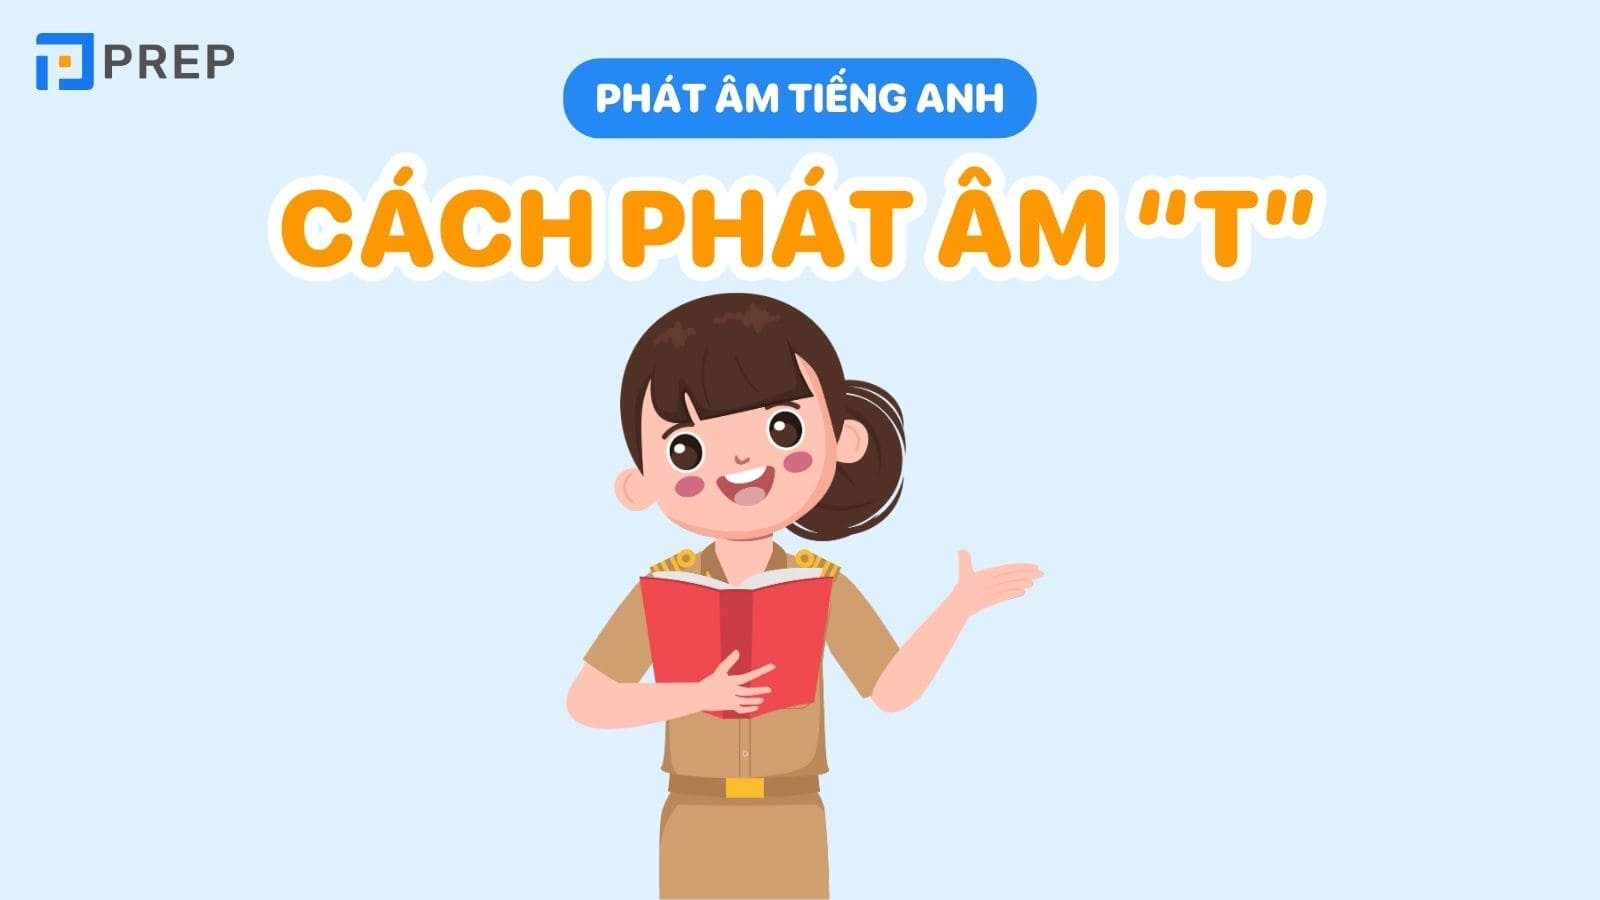 cach-phat-am-t-trong-tieng-anh-chuan-quoc-te.jpg